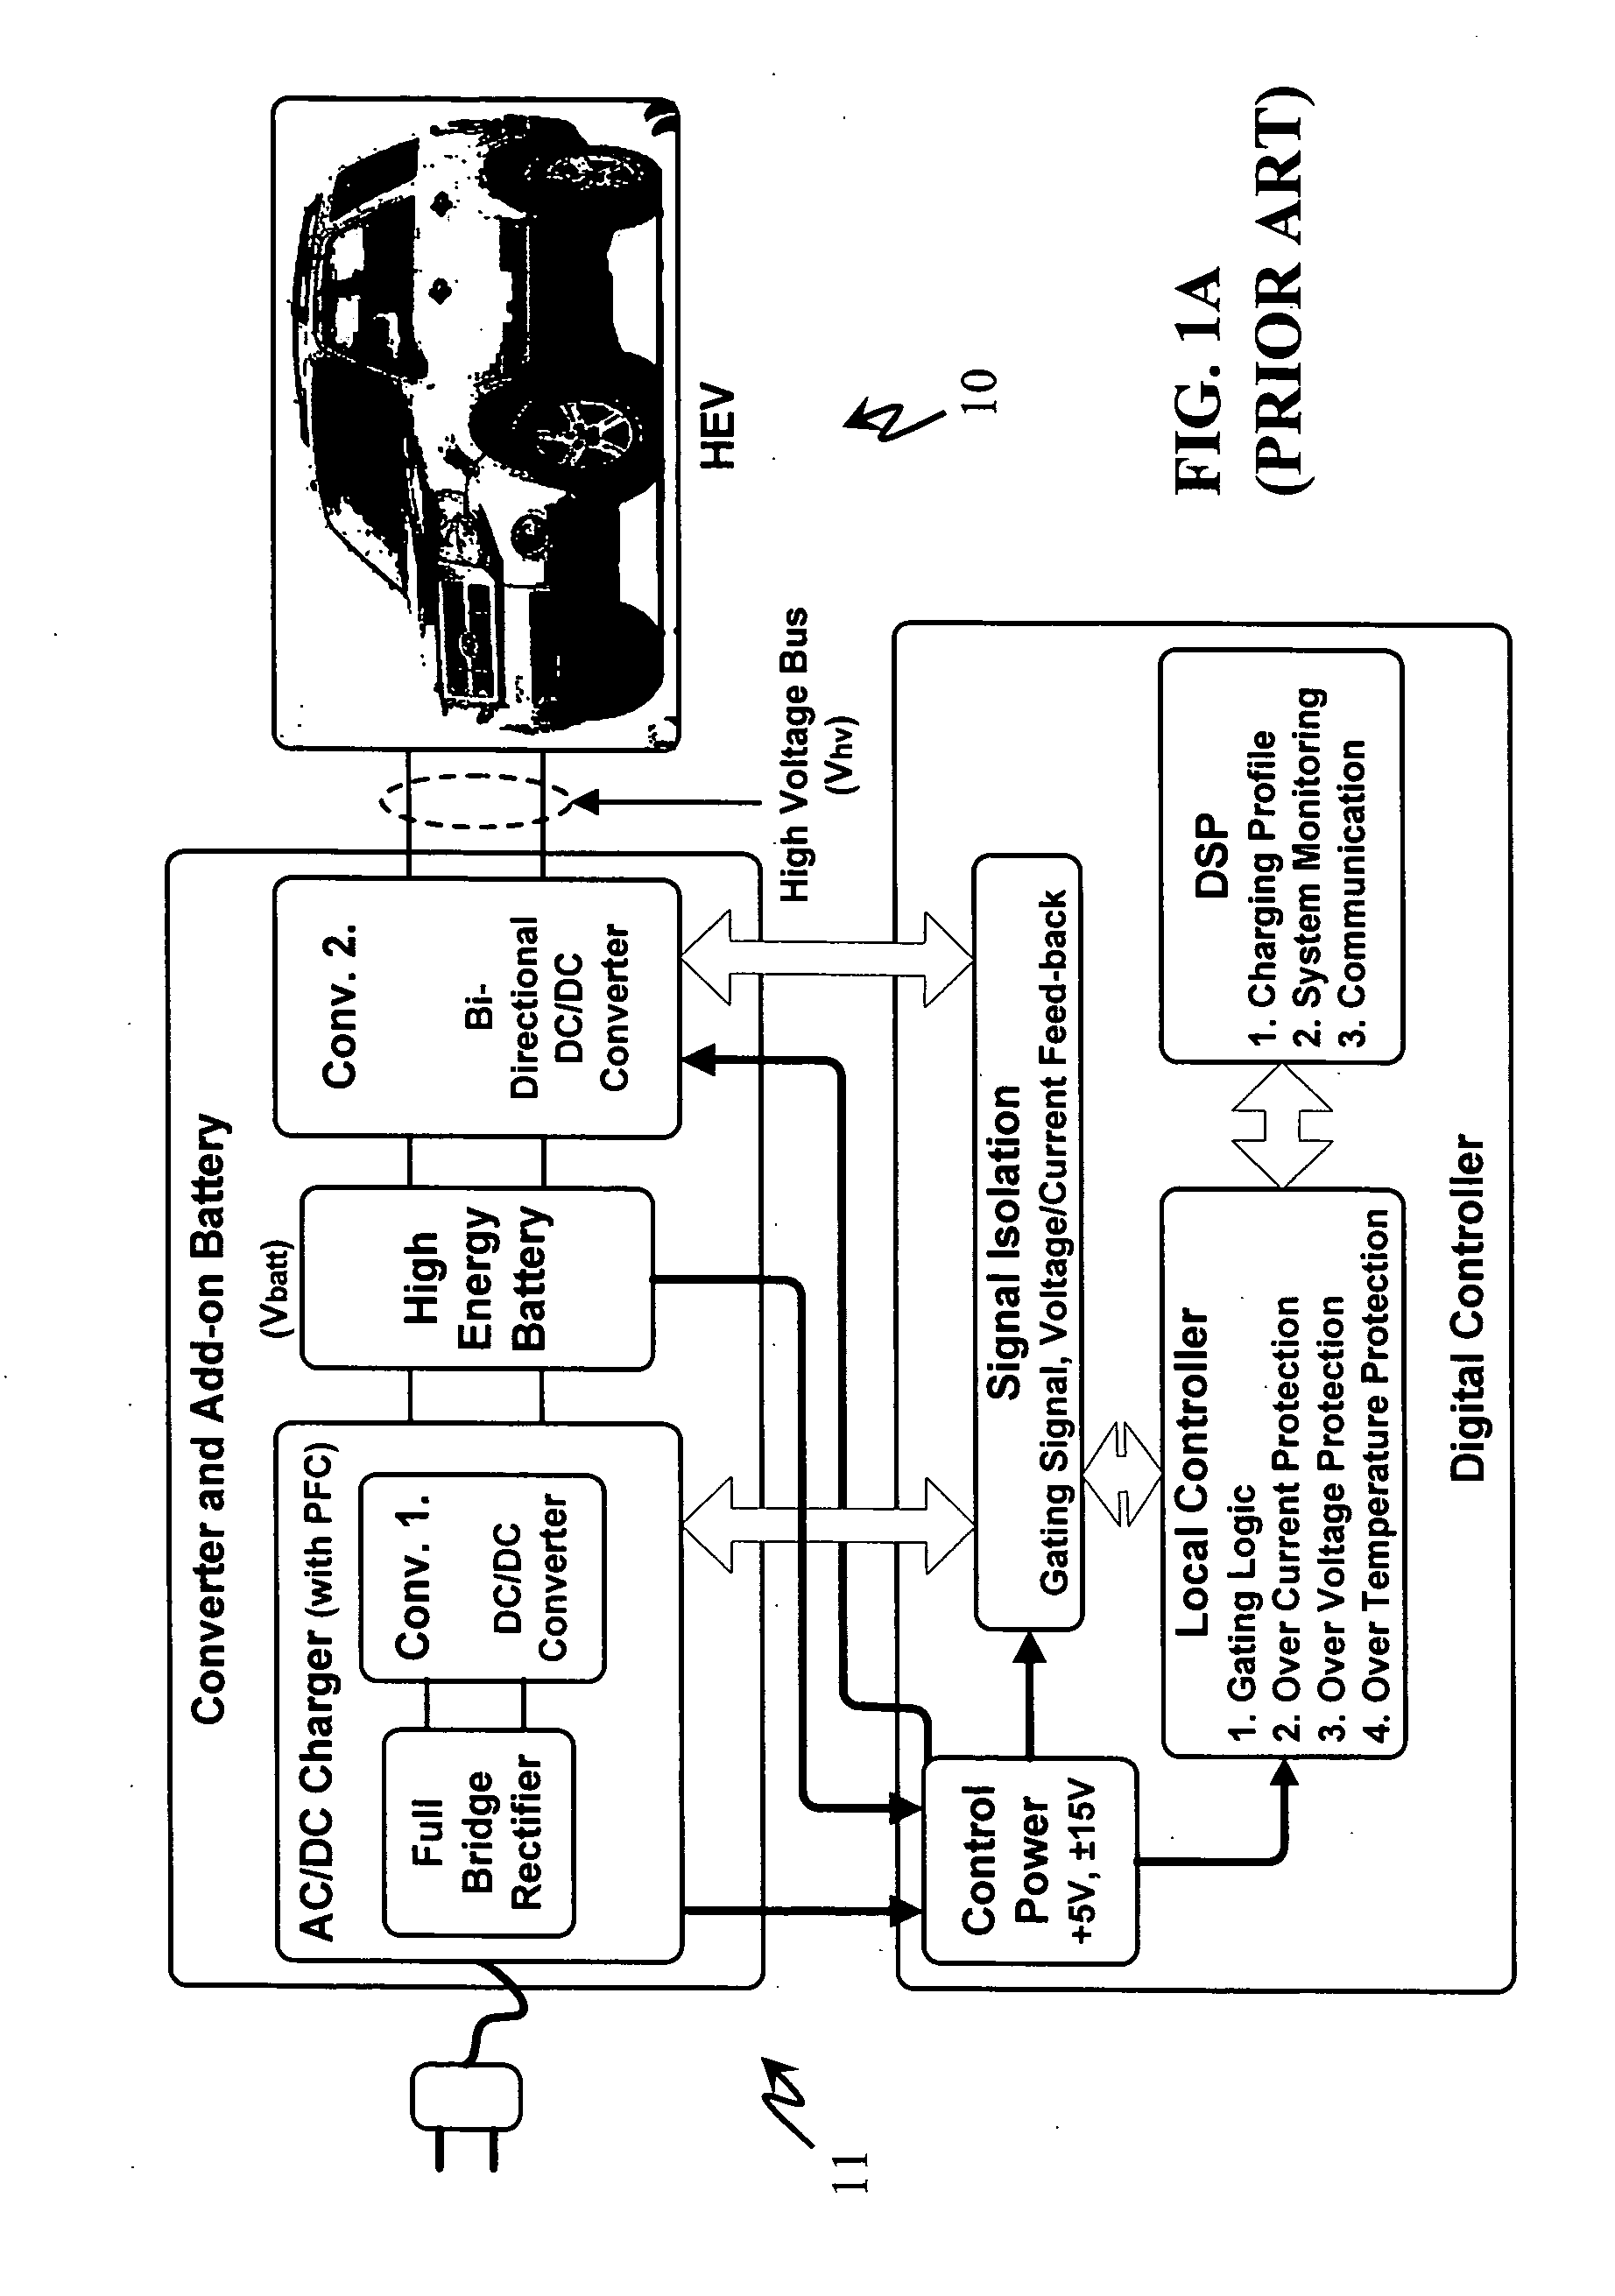 Integrated bi-directional converter for plug-in hybrid electric vehicles